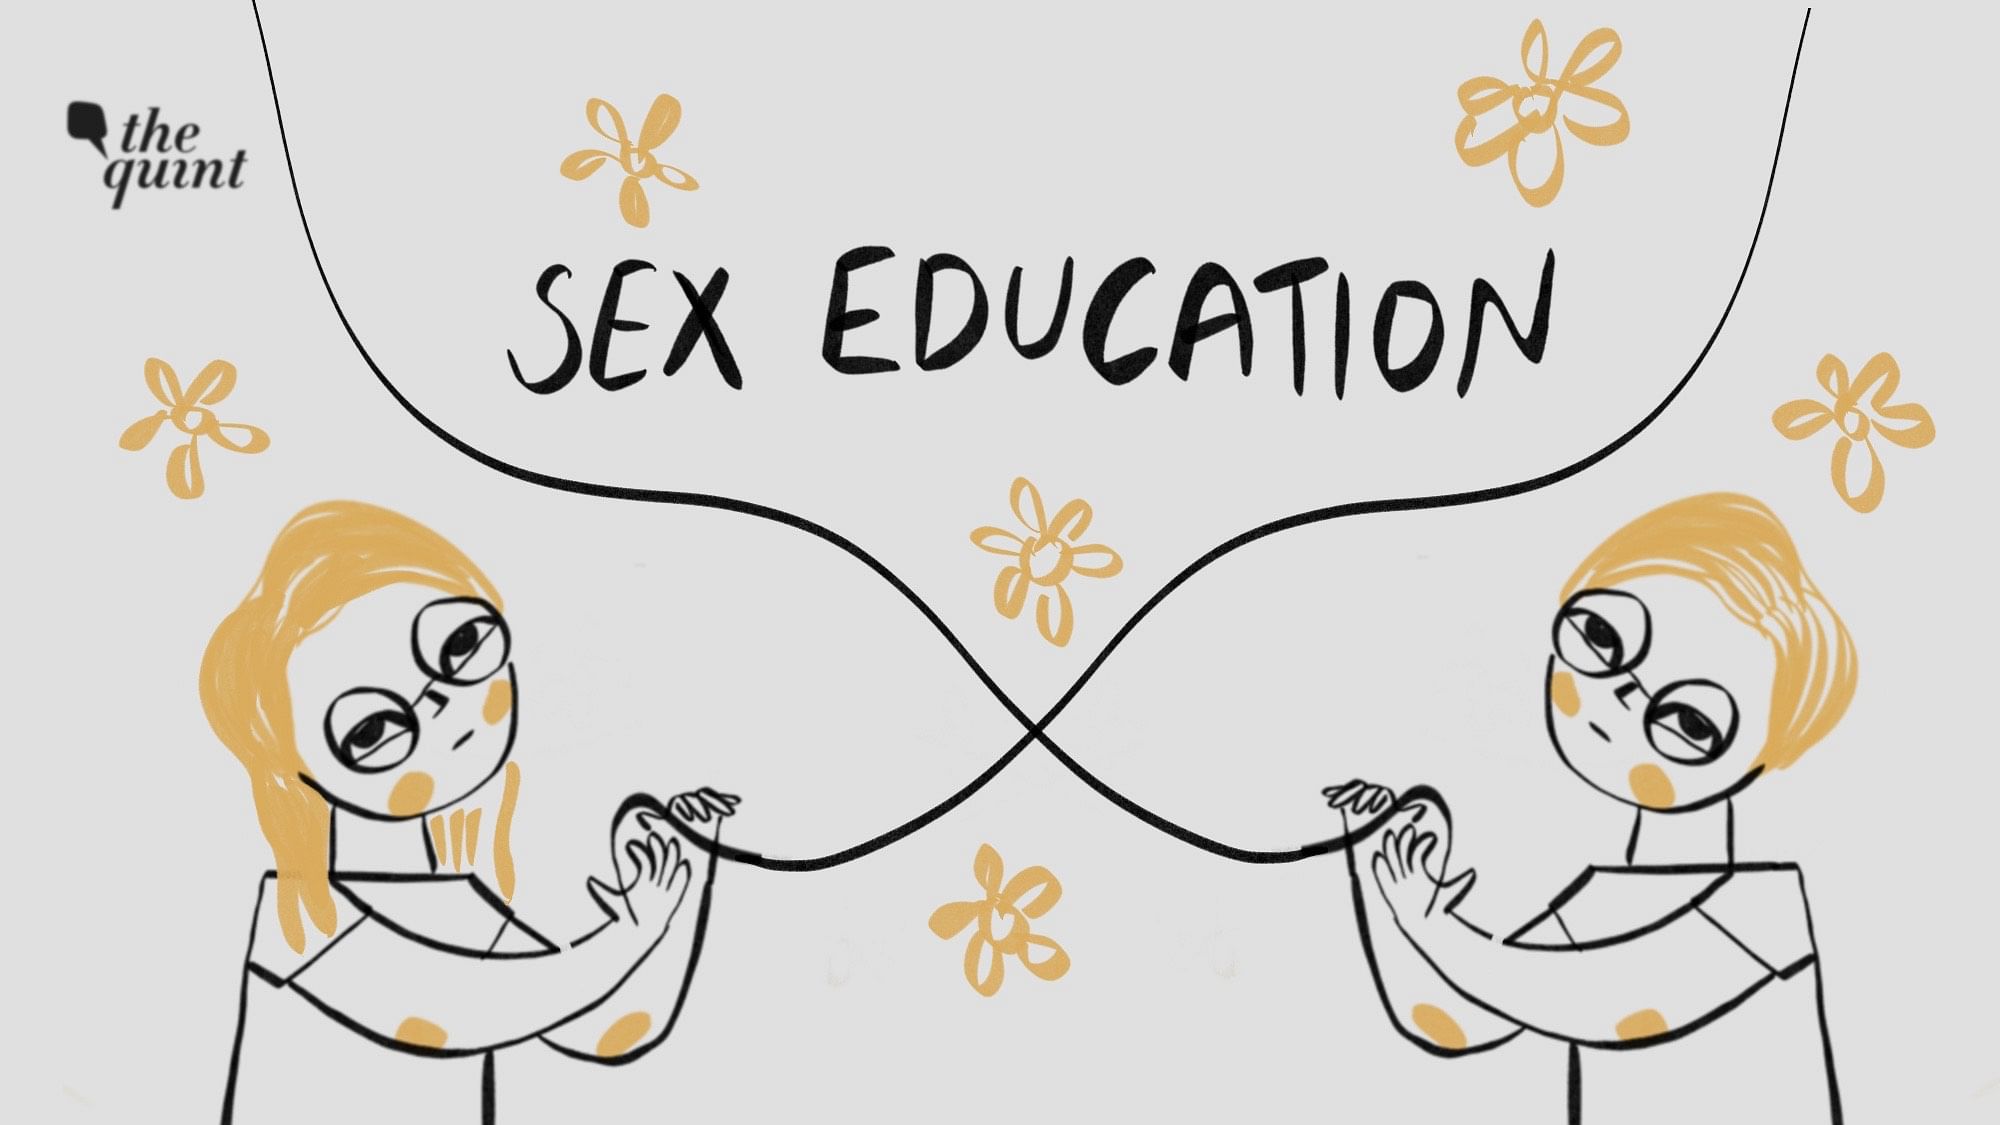 Sex Education In India India Needs A Comprehensive Sex Education Plan